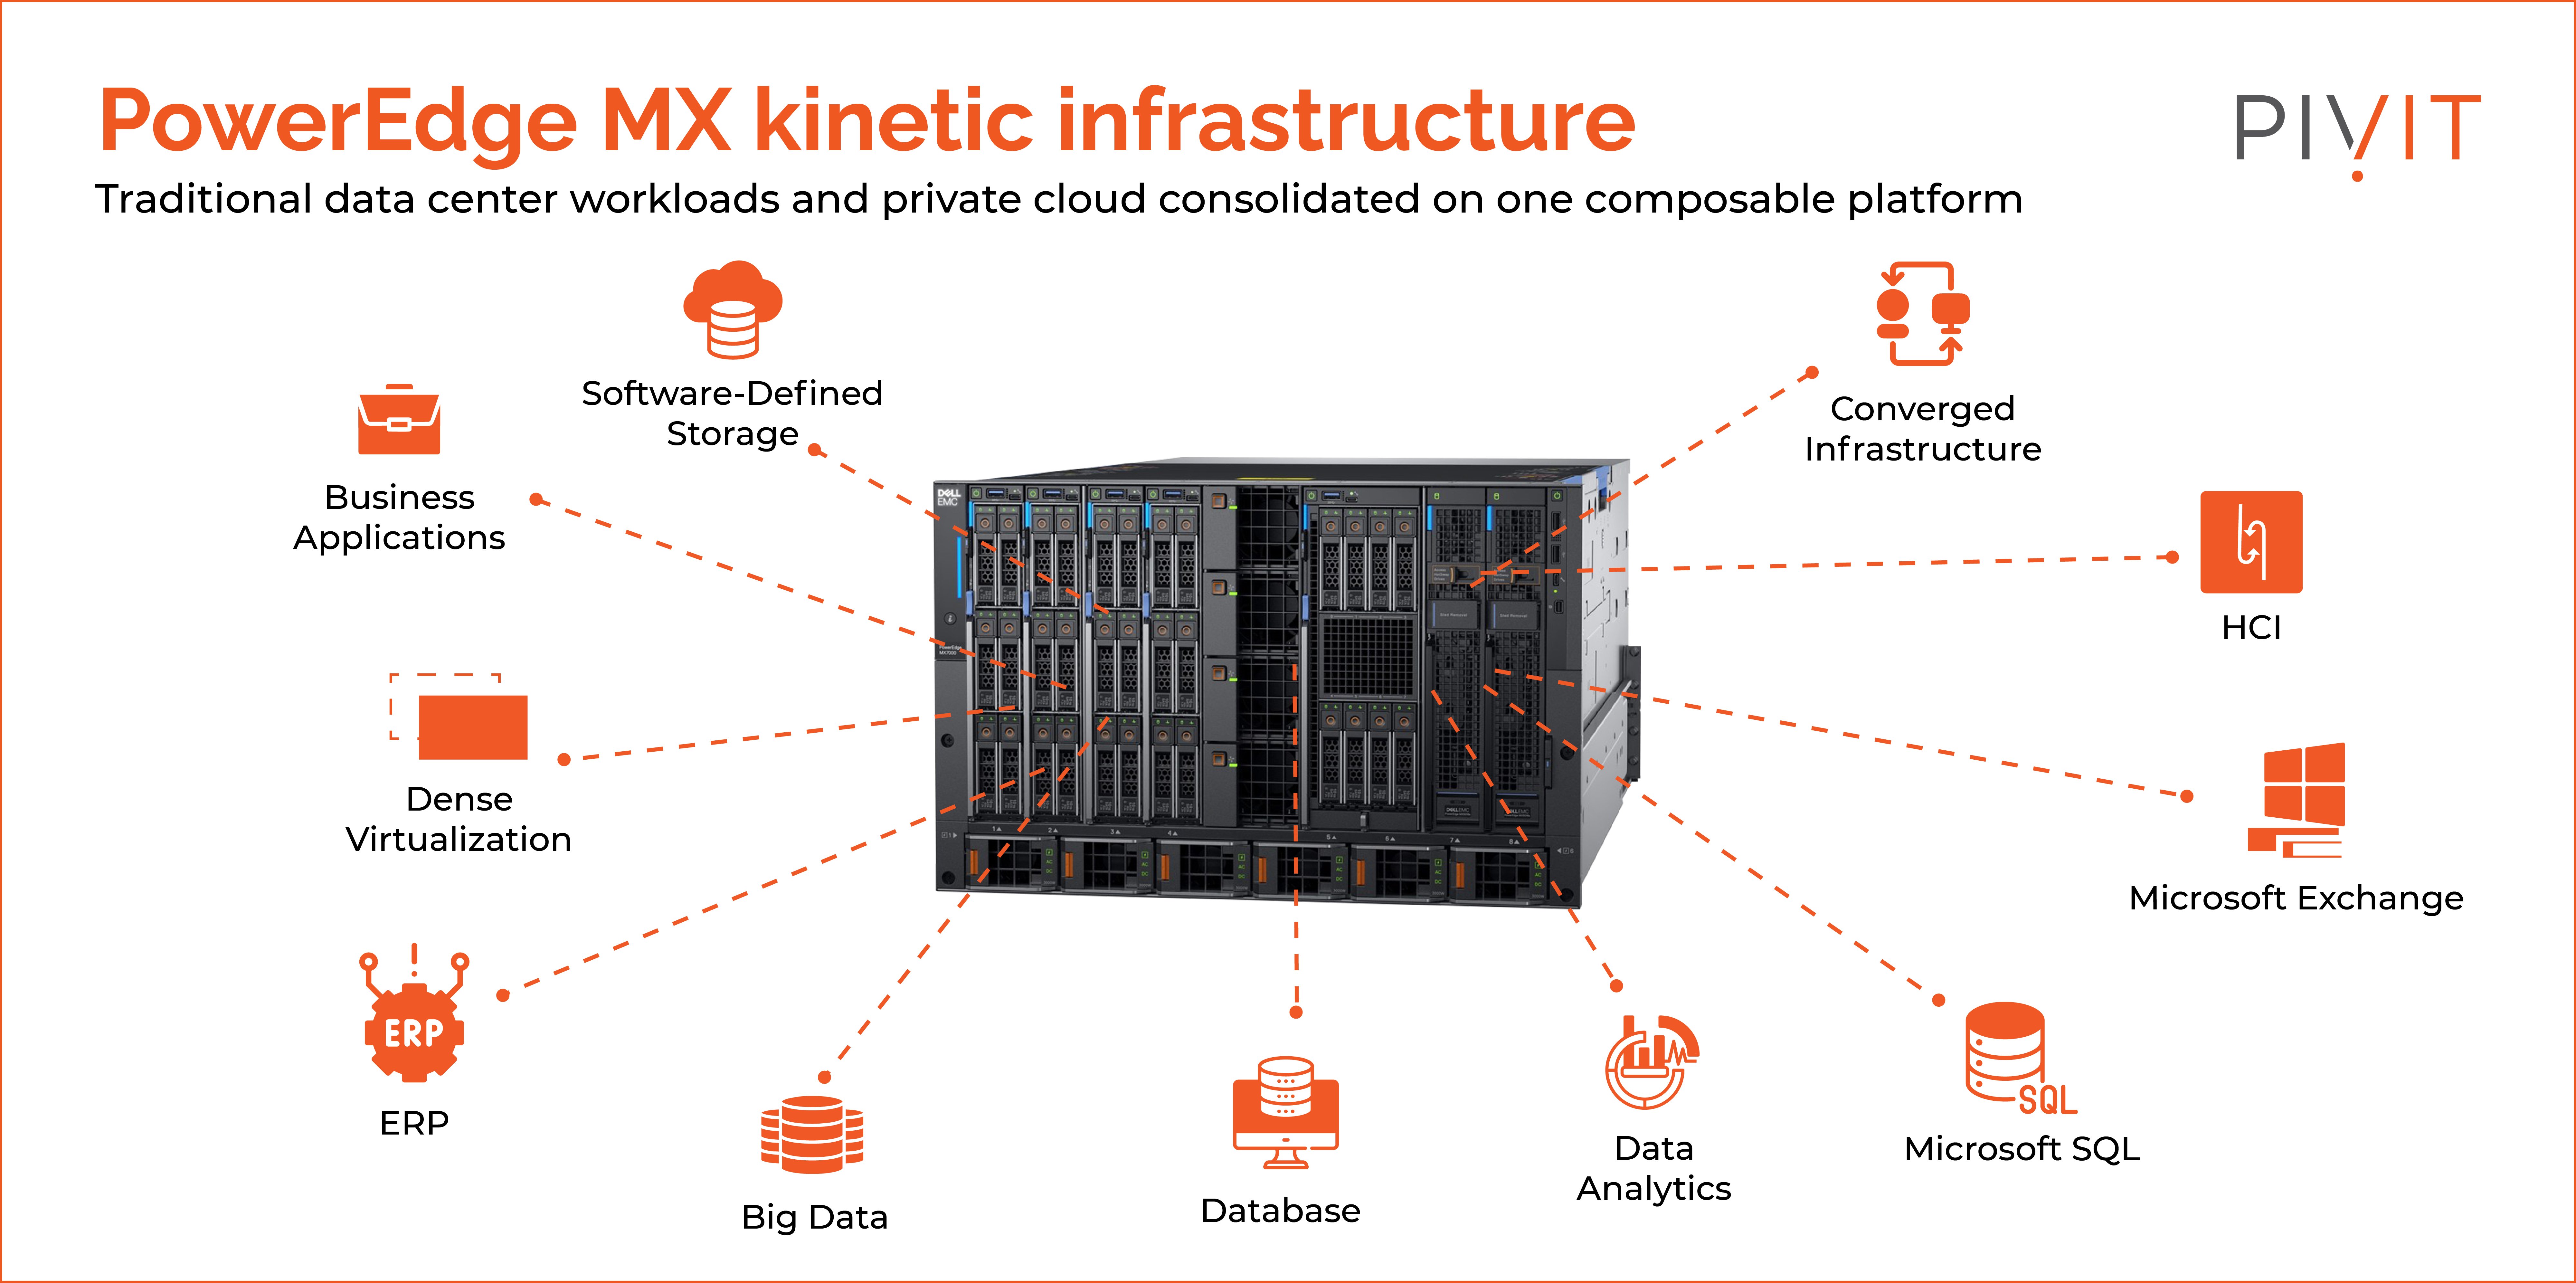 Dell PowerEdge MX kinetic infrastructure features